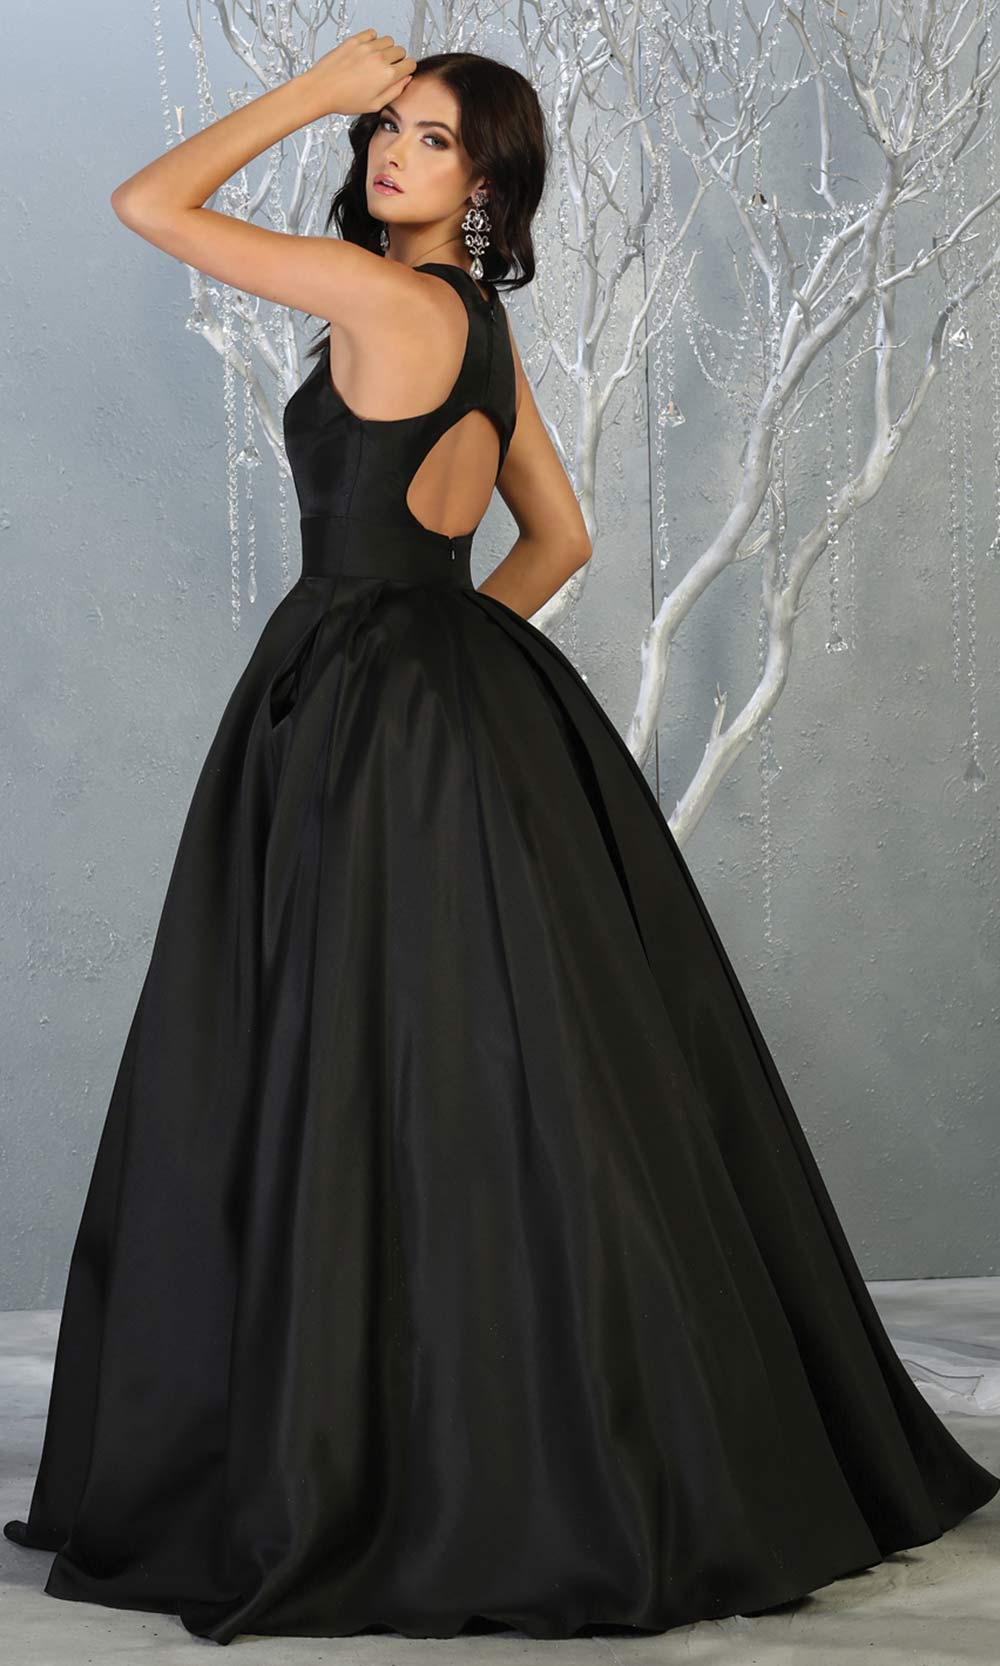 Mayqueen MQ1721-long black semi ballgown w/open back. This simple black dress is perfect for prom, engagement/e-shoot, wedding reception dress, bridesmaid dresses, formal wedding guest dress, sweet 16 dress, debut. Plus sizes avail-b.jpg